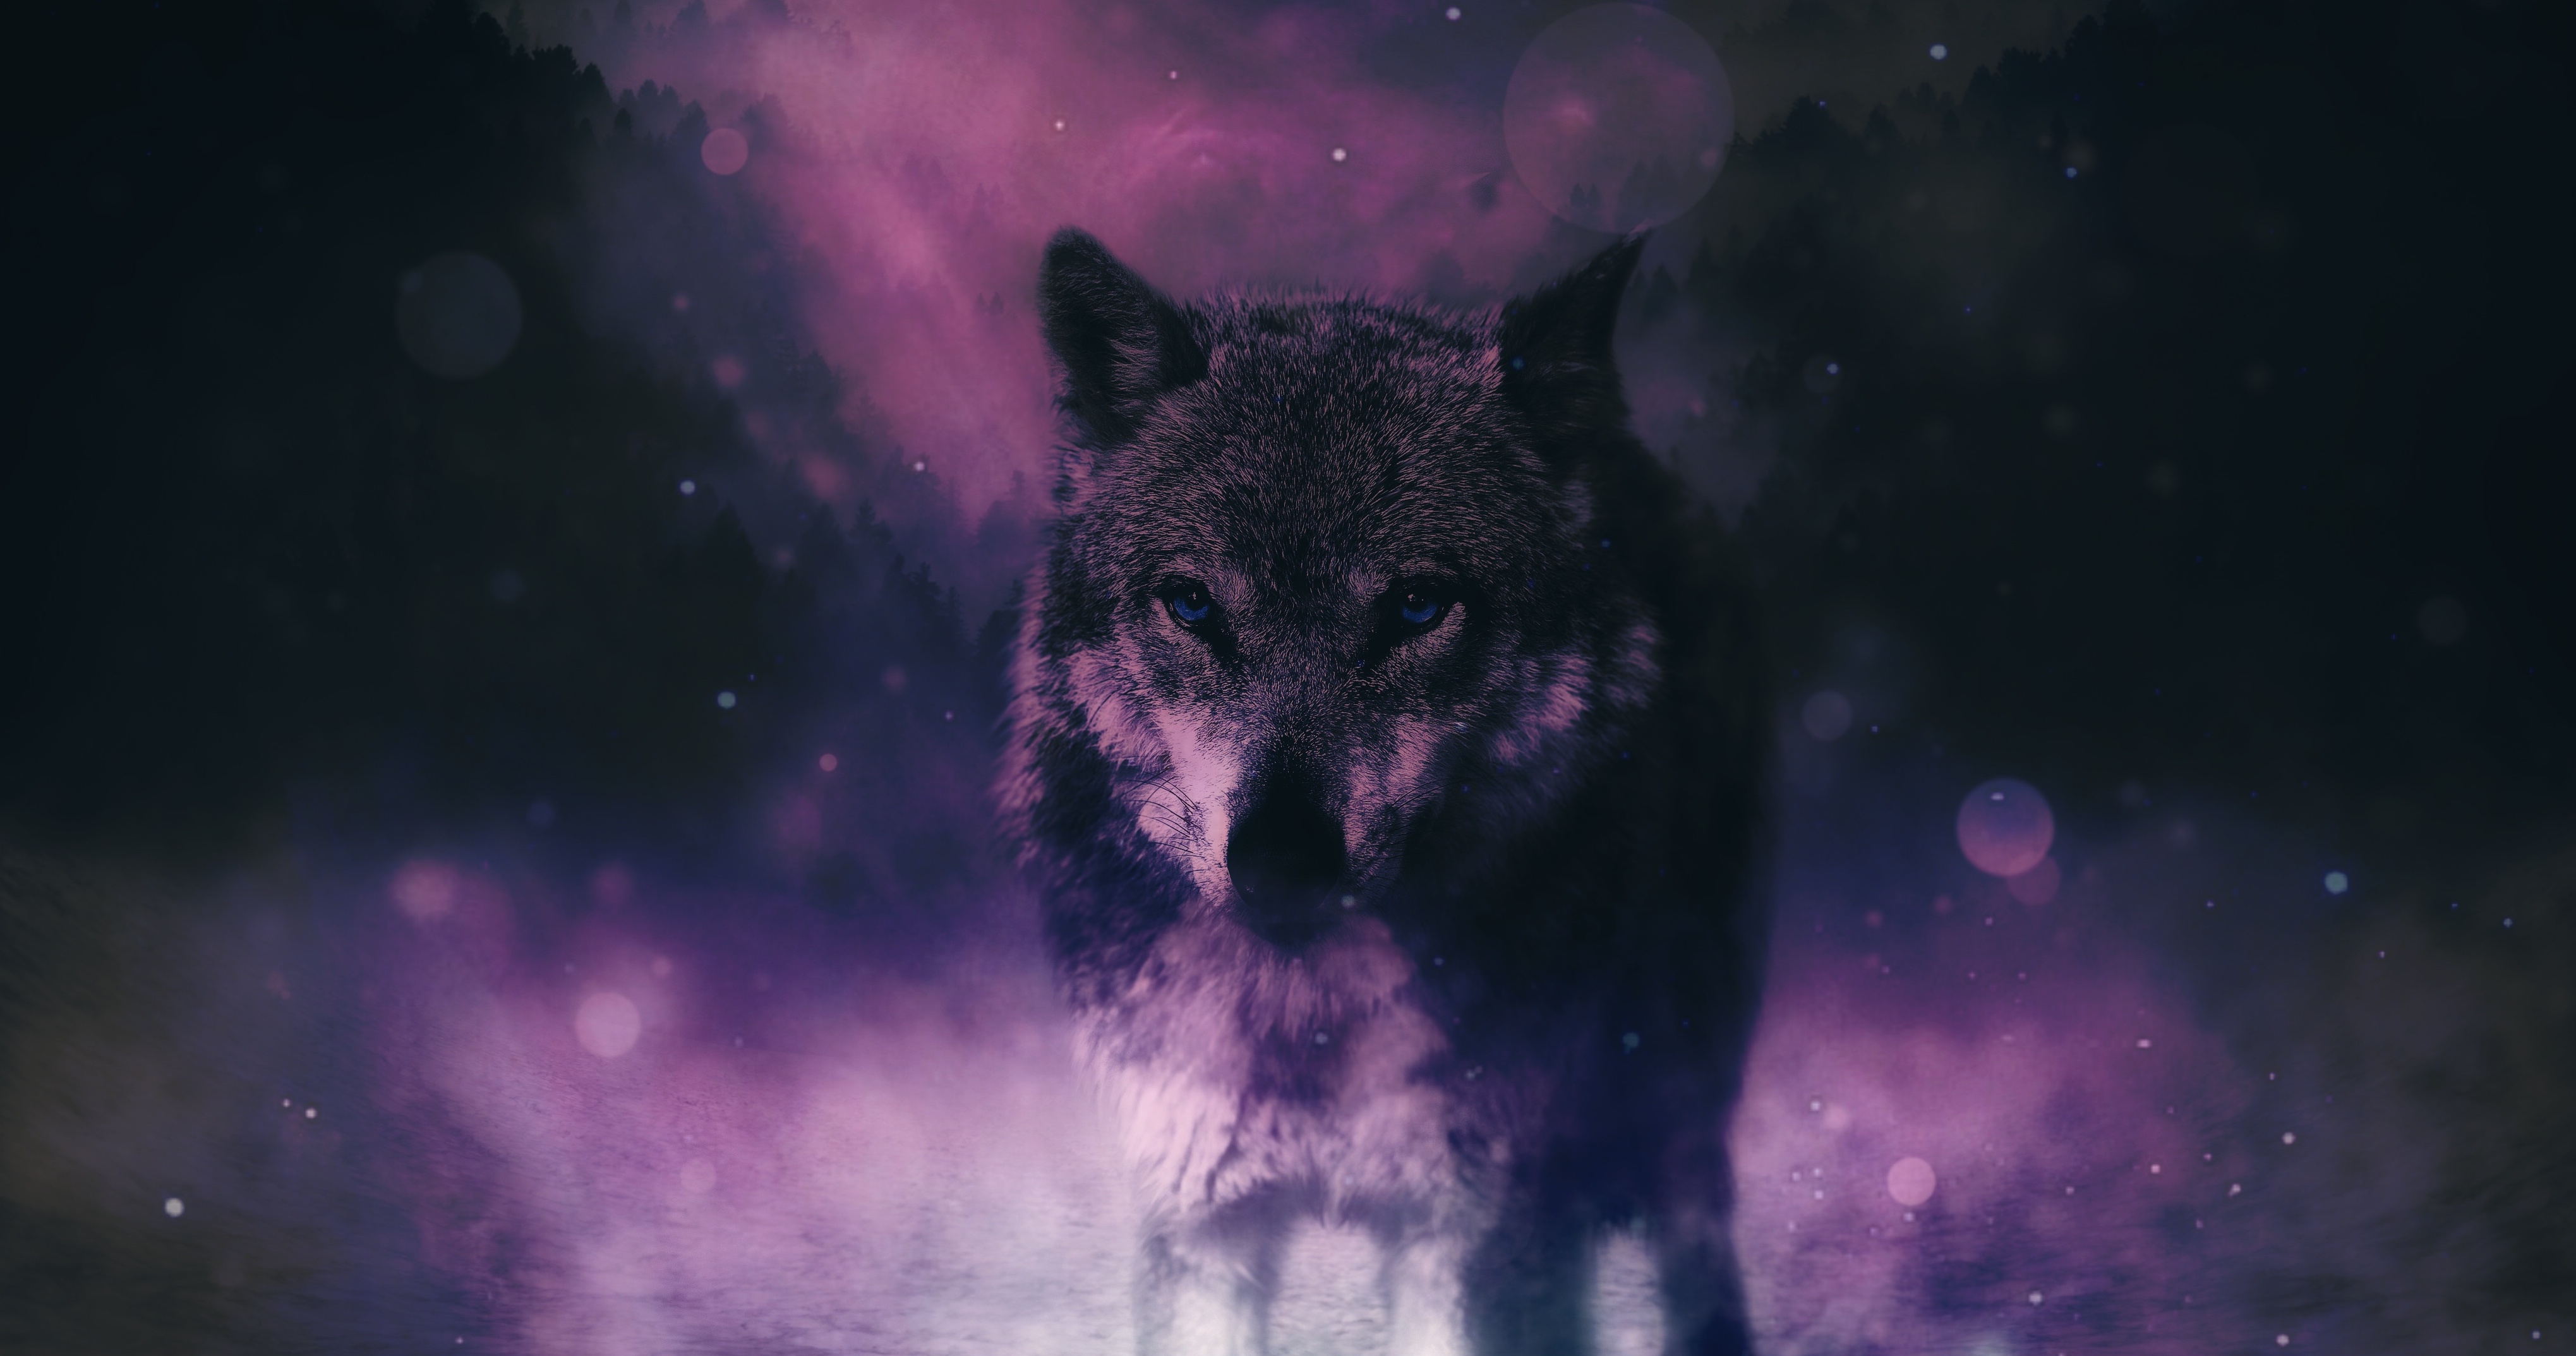 Where Wolf Wallpapers - Wallpaper Cave-cheohanoi.vn